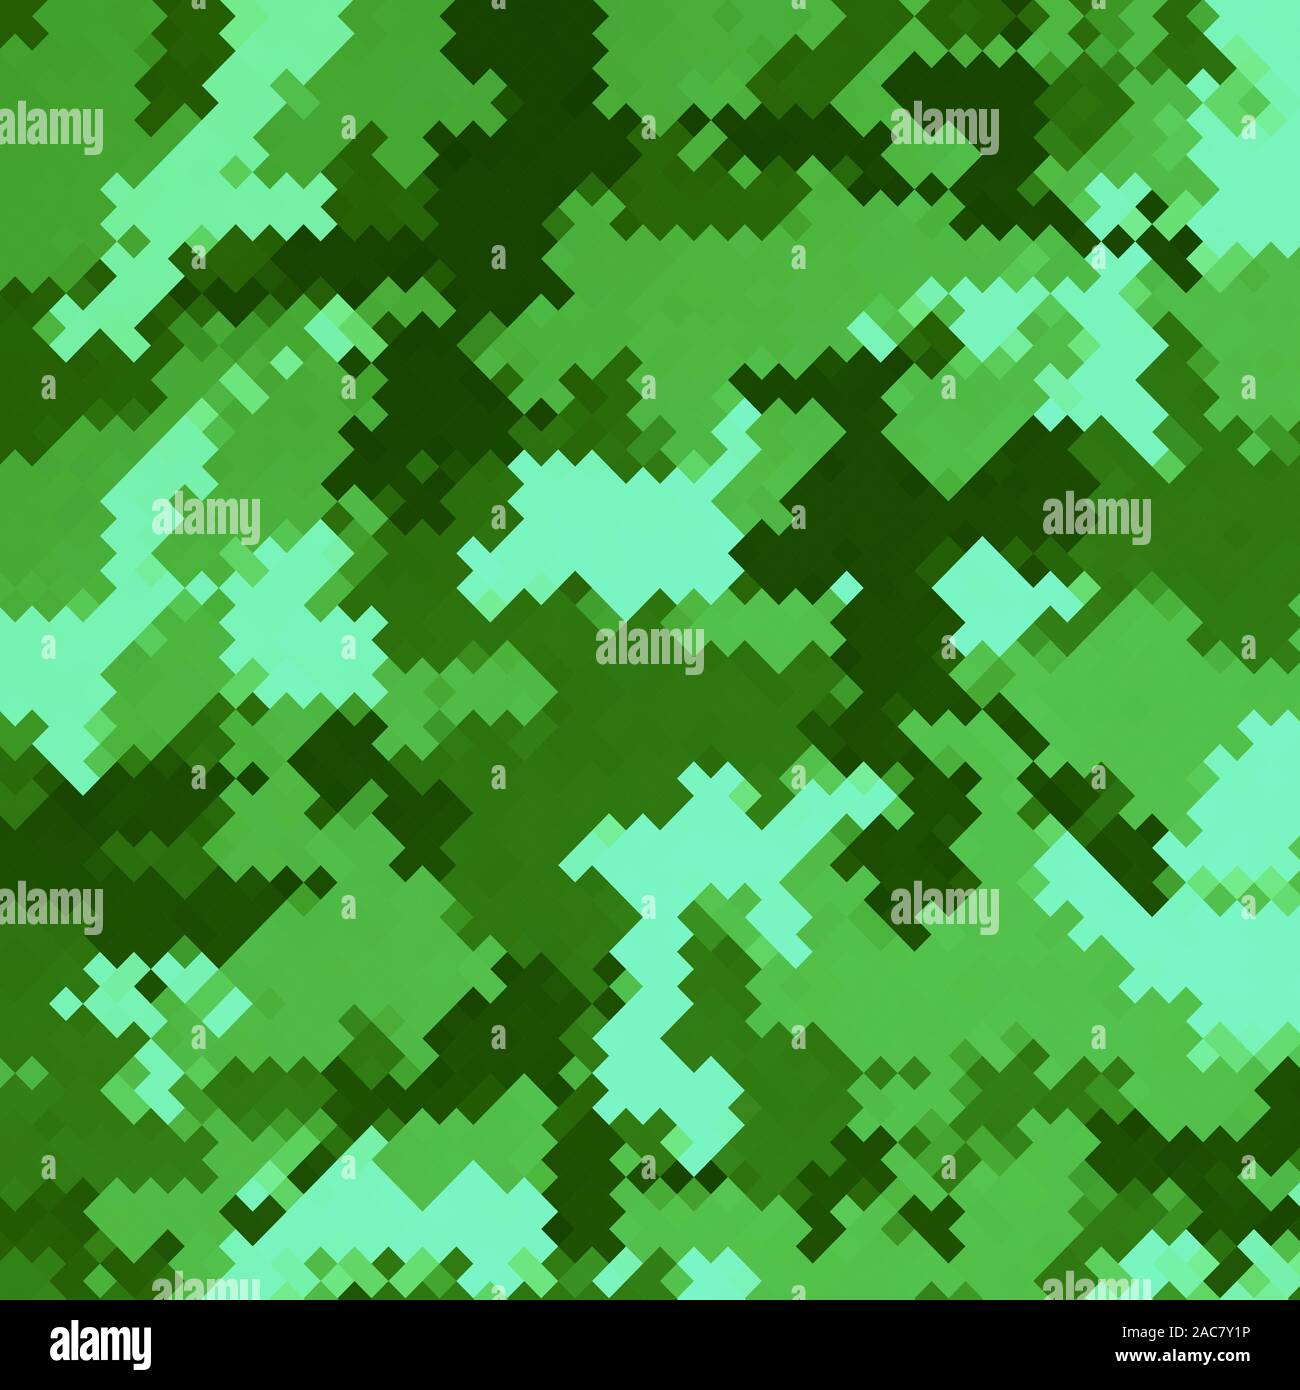 Urban Camouflage Background. Army Military Pattern. Green Pixel Fabric Textile Print for Uniforms and Weapons. Stock Vector